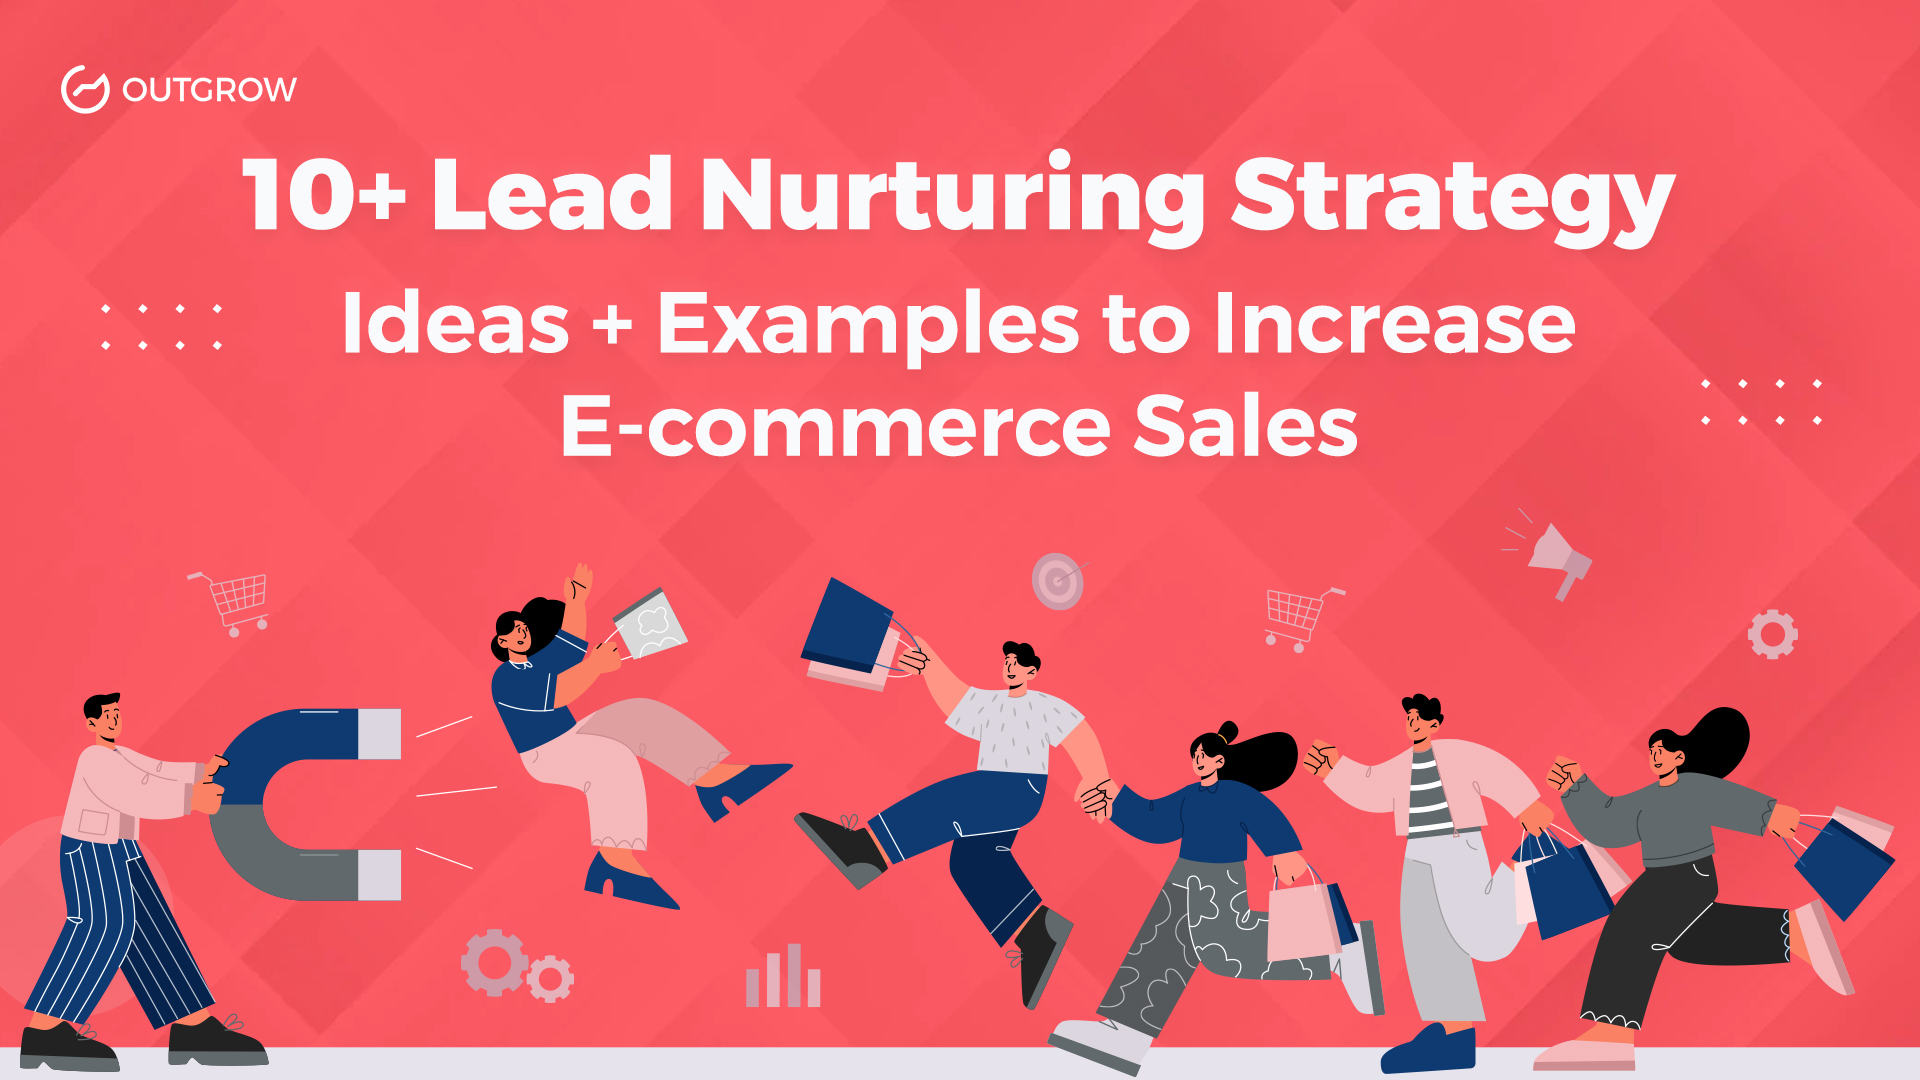 10+ Lead Nurturing Strategy Ideas + Examples to Increase E-commerce Sales 